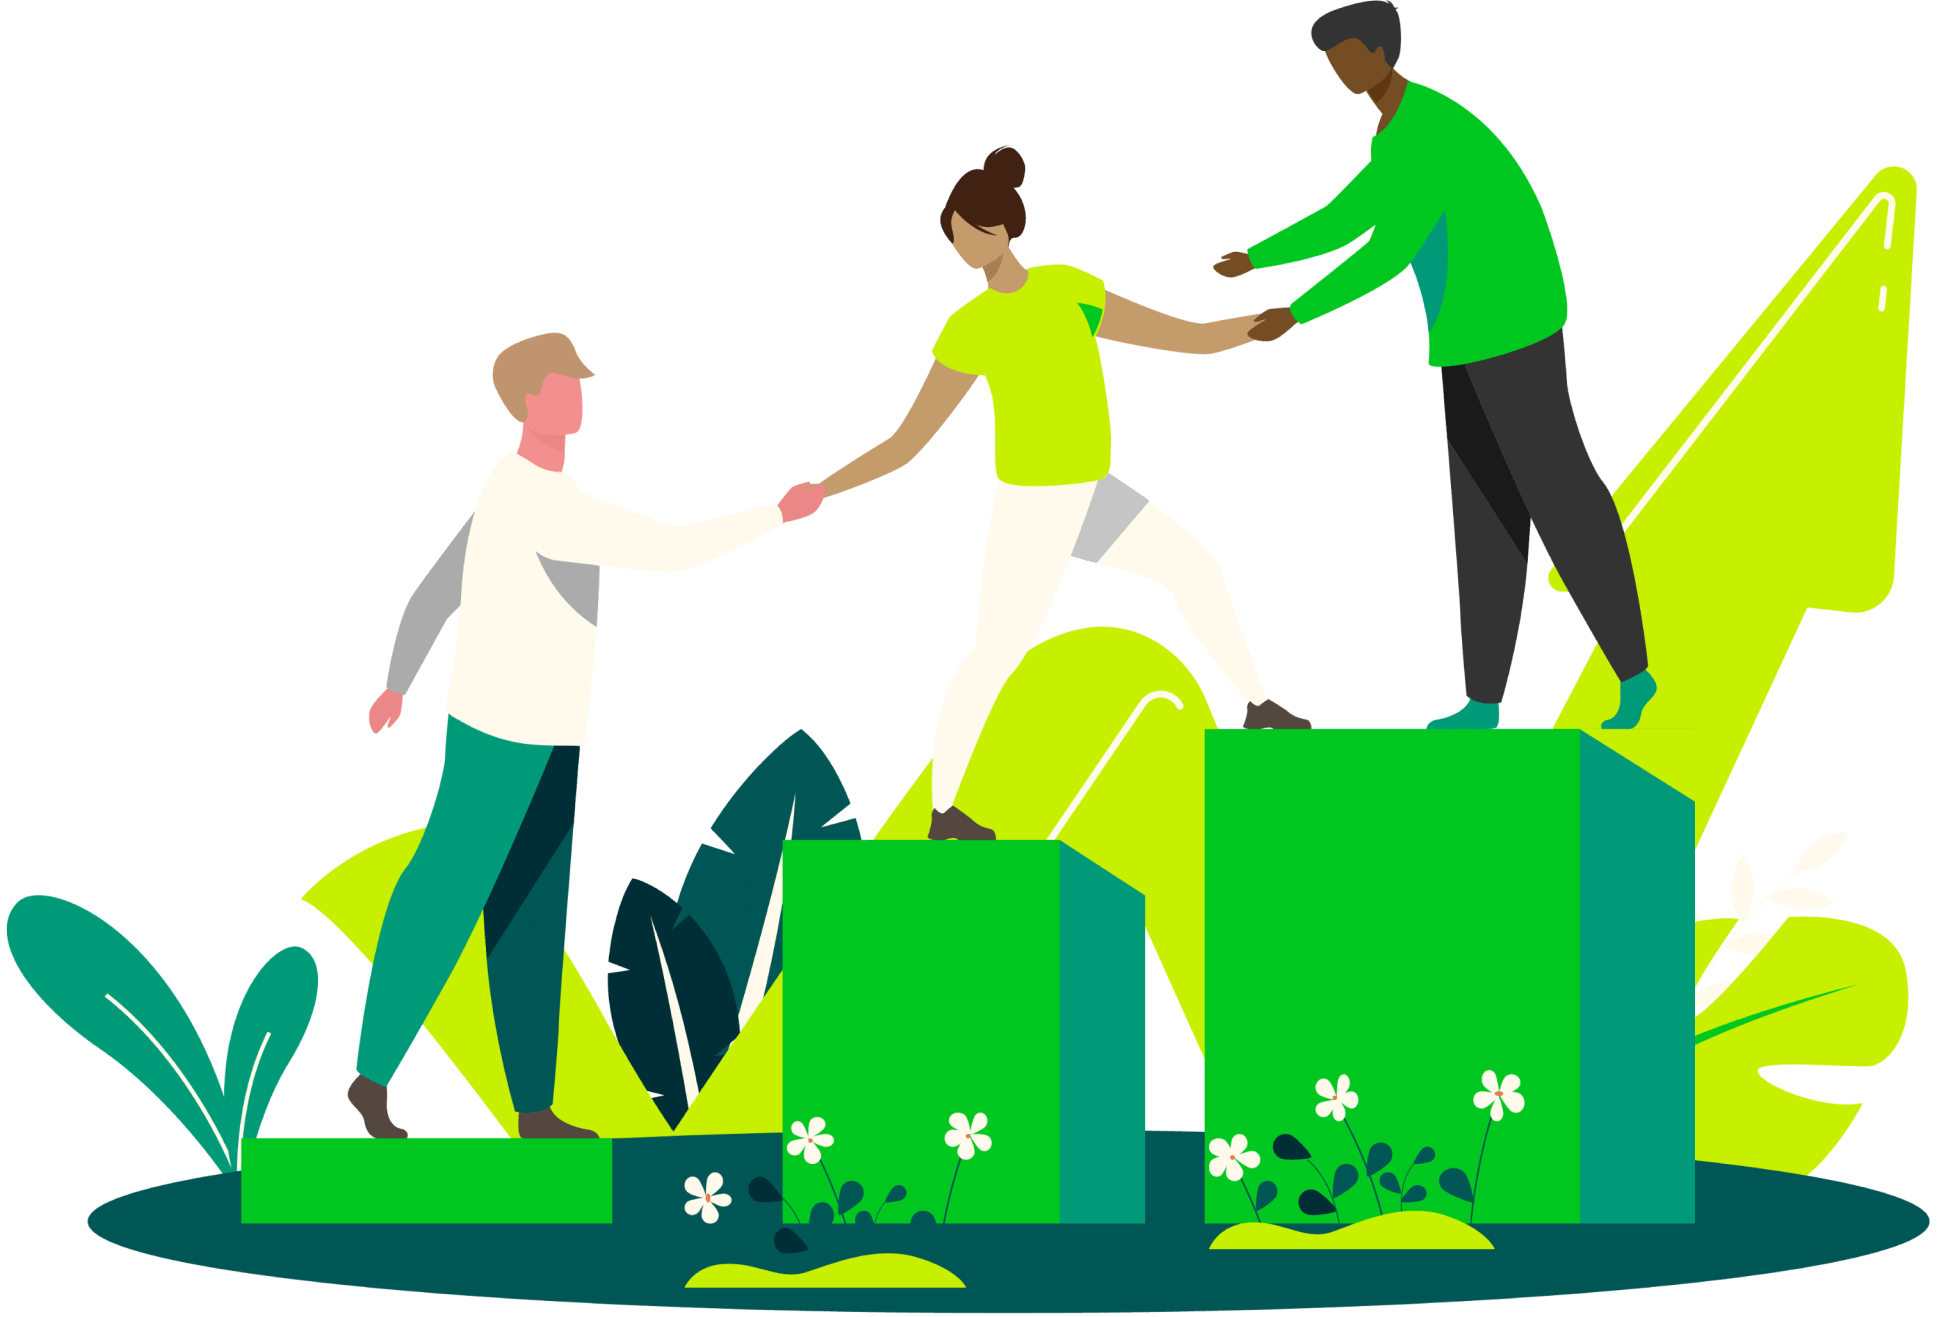 an illustration of 3 people each helping the other climb up some green blocks